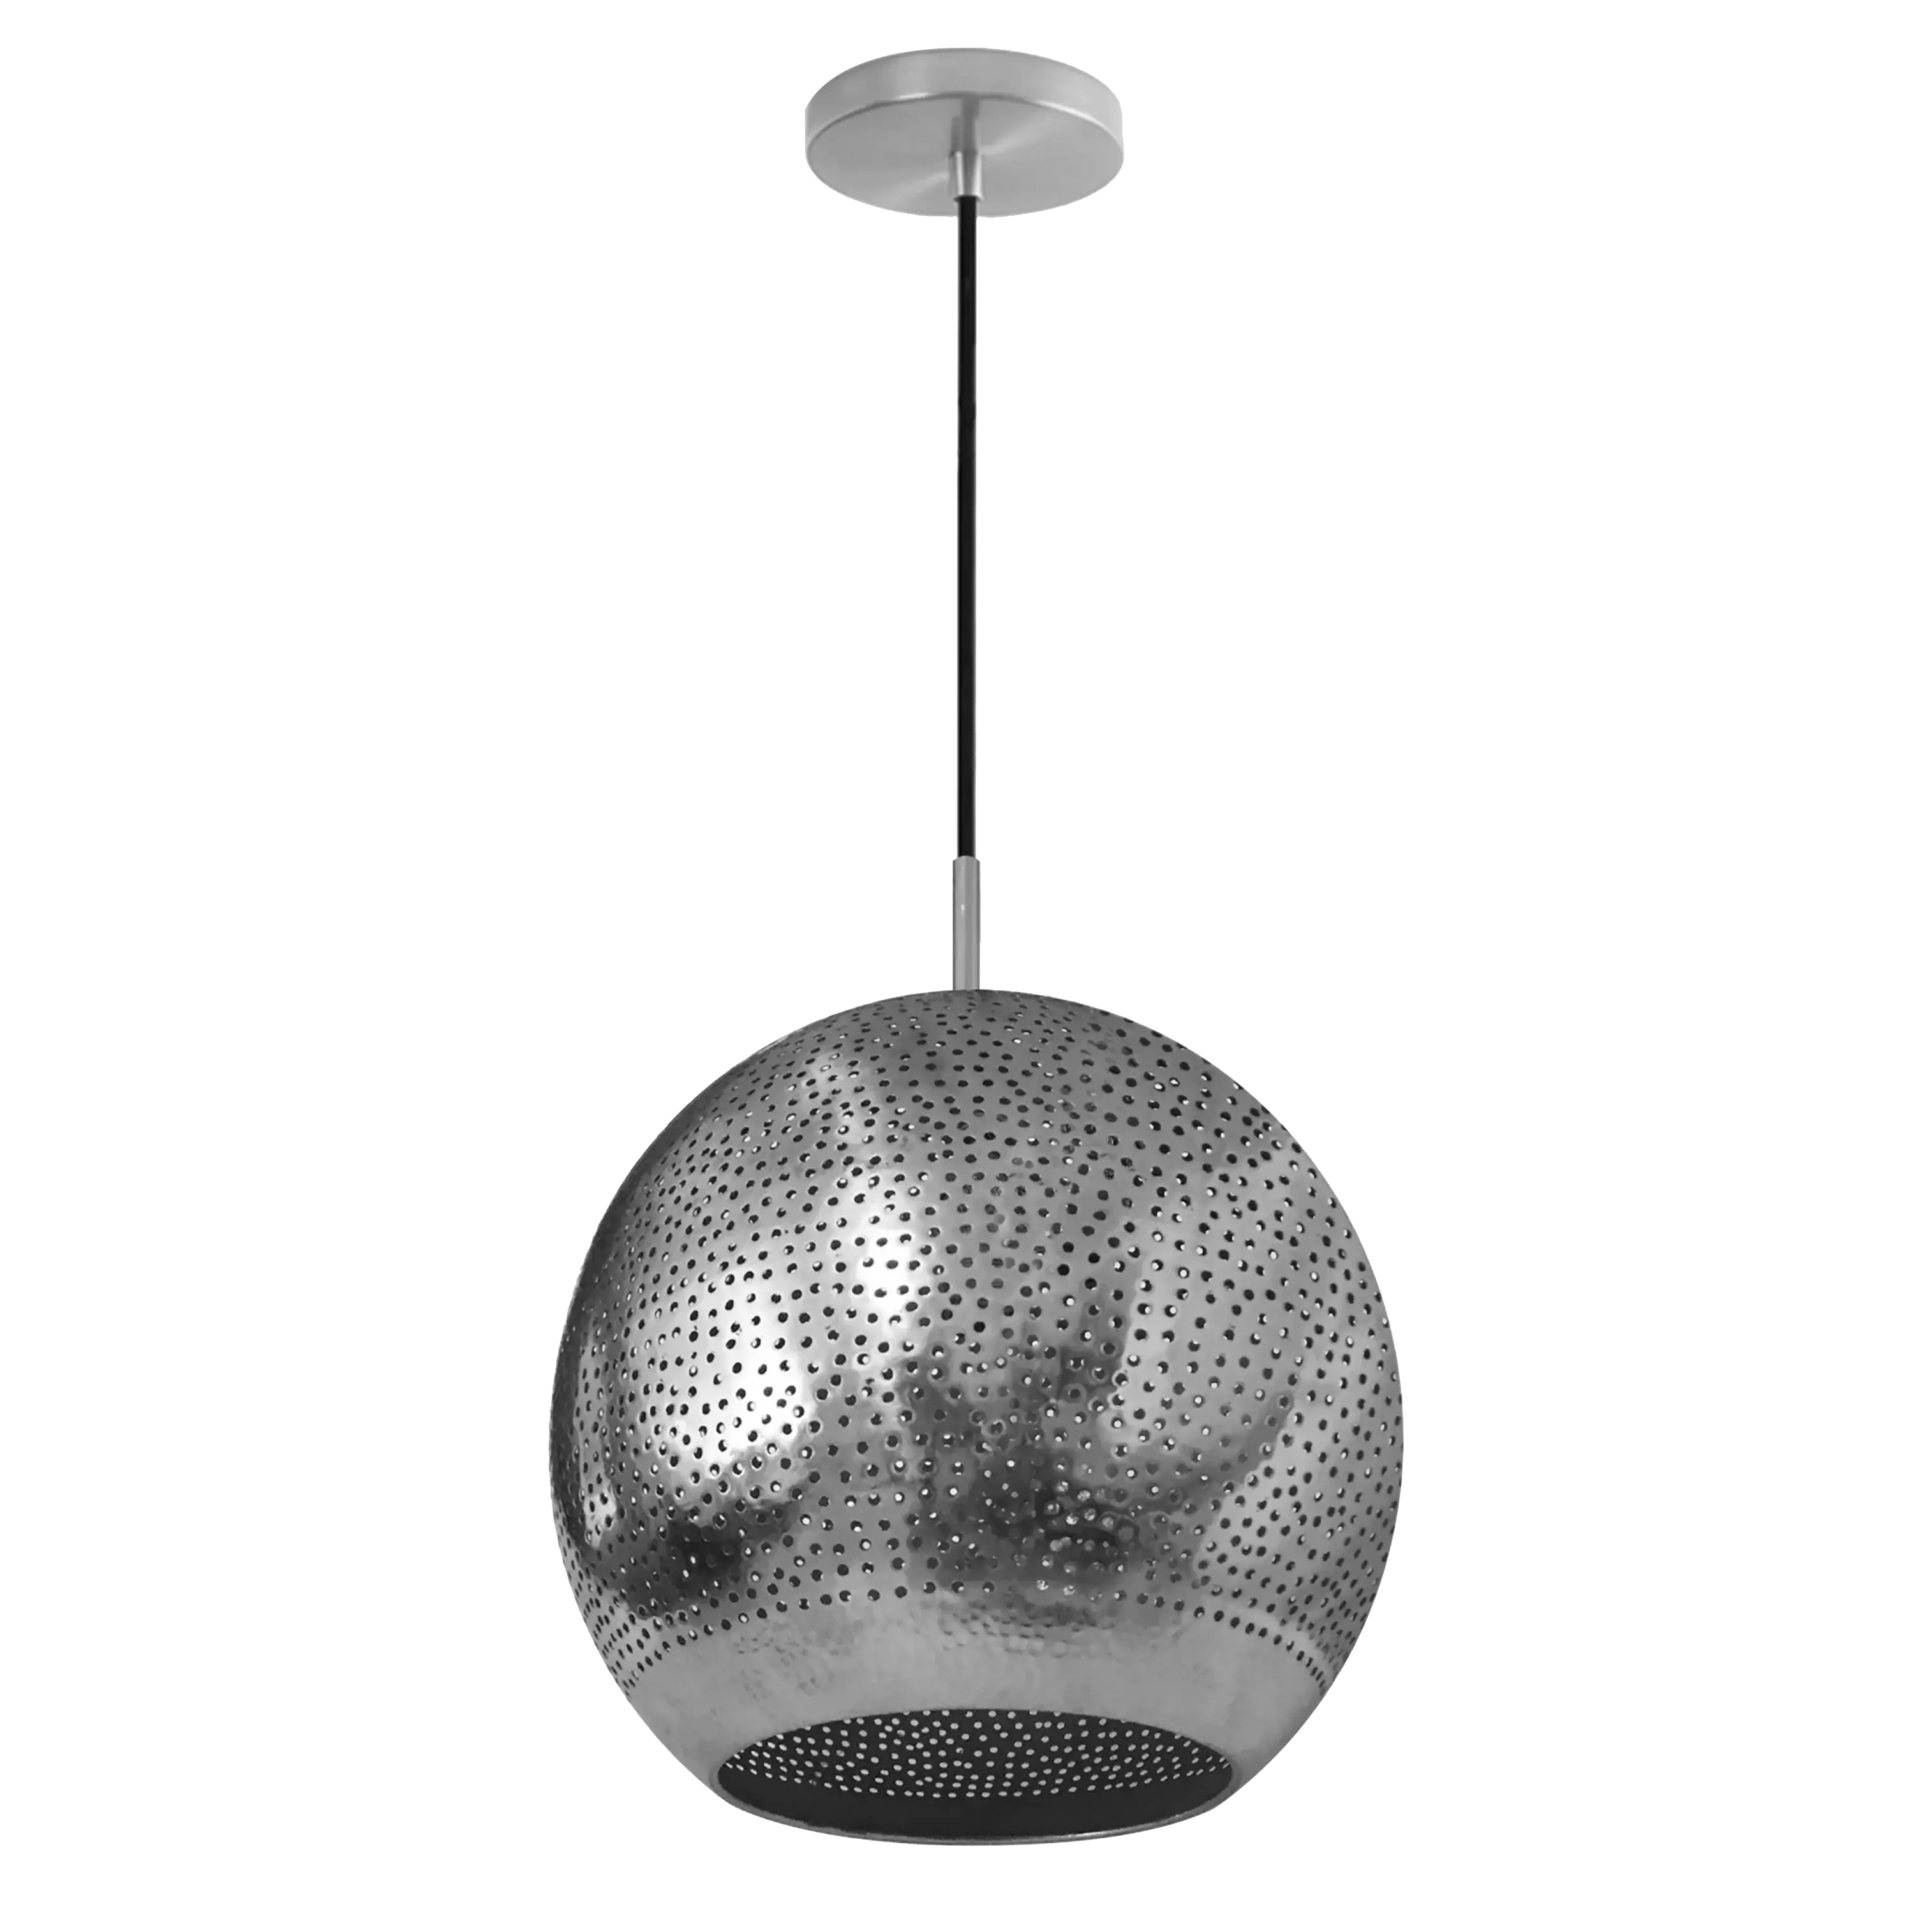 Dounia home Pendant light in nickel silver  made of Metal, Model: Shams